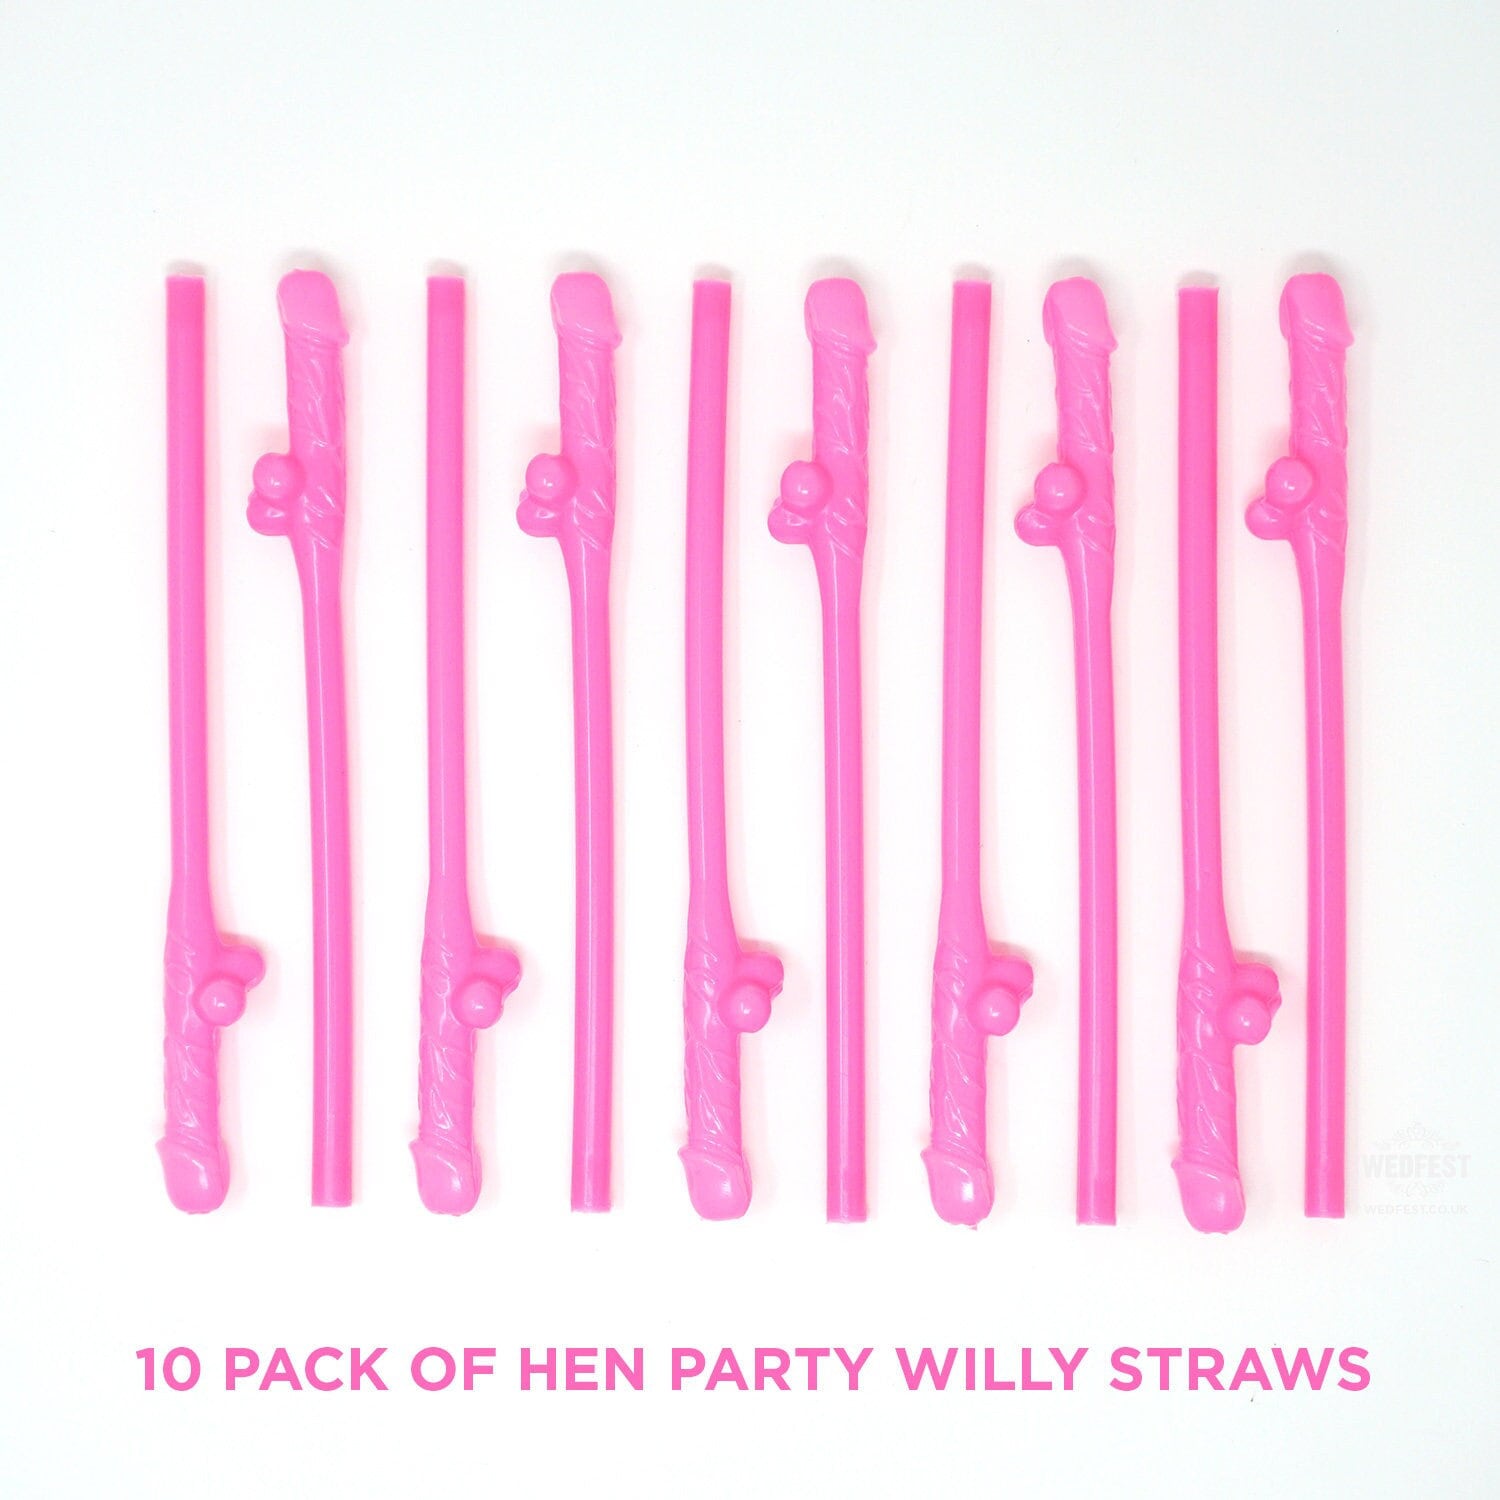 Dick Straws, 1, 5, 10, 15, 20 30 Penis Party Favors, Willy Straws, multi  racial dicky straws, Bachelorette Party Straws Shower